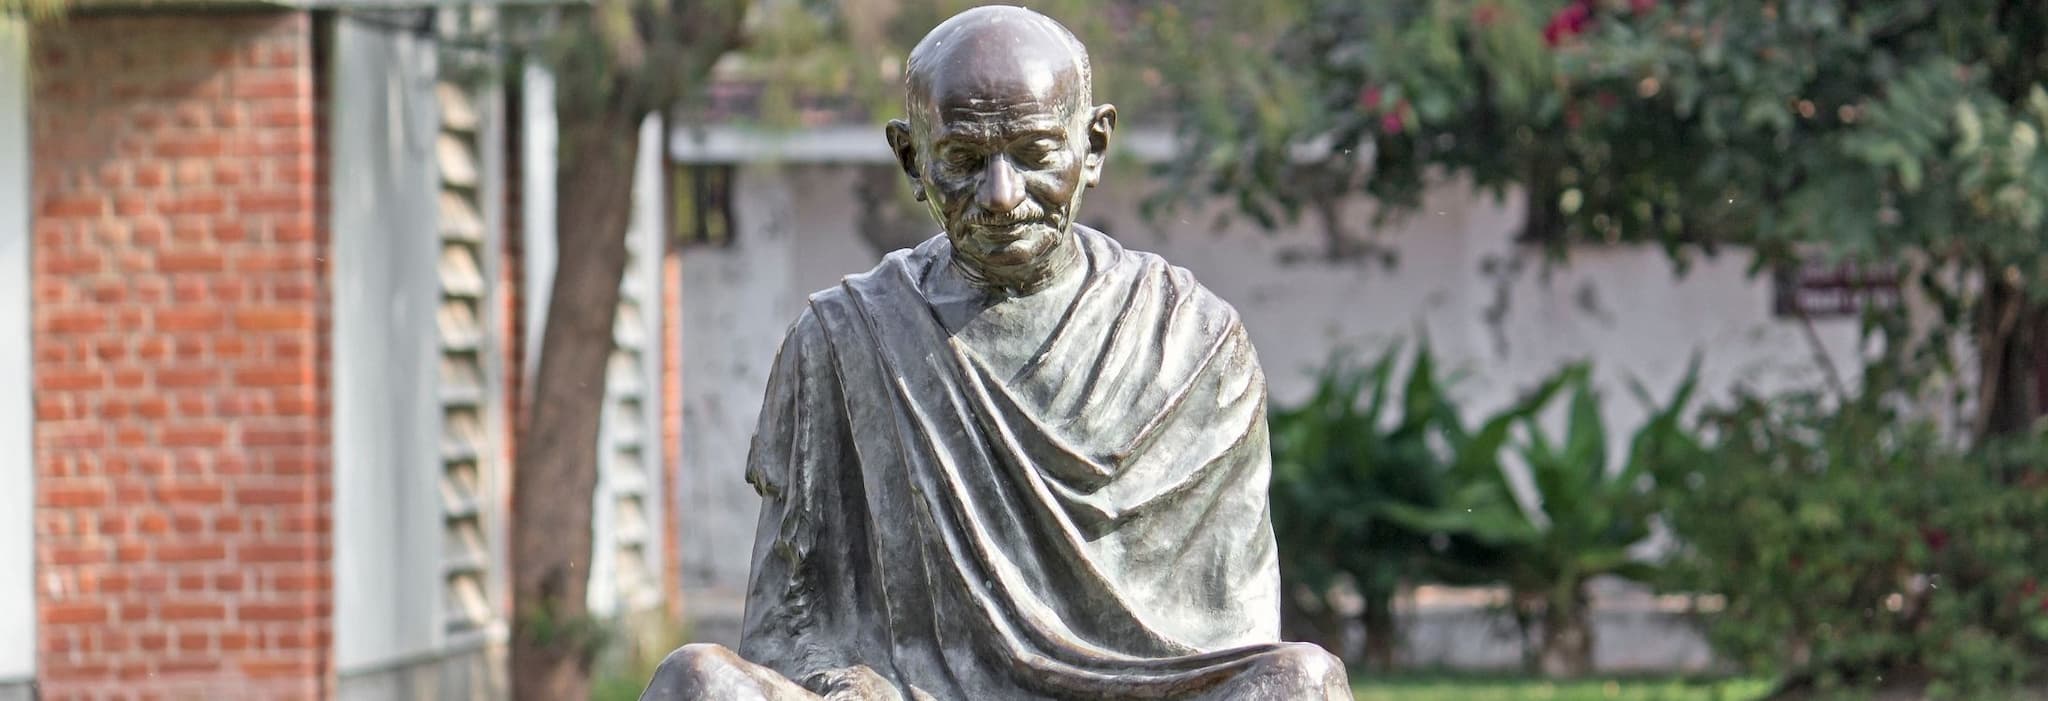 5 places to spot a Gandhi statue (other than India)